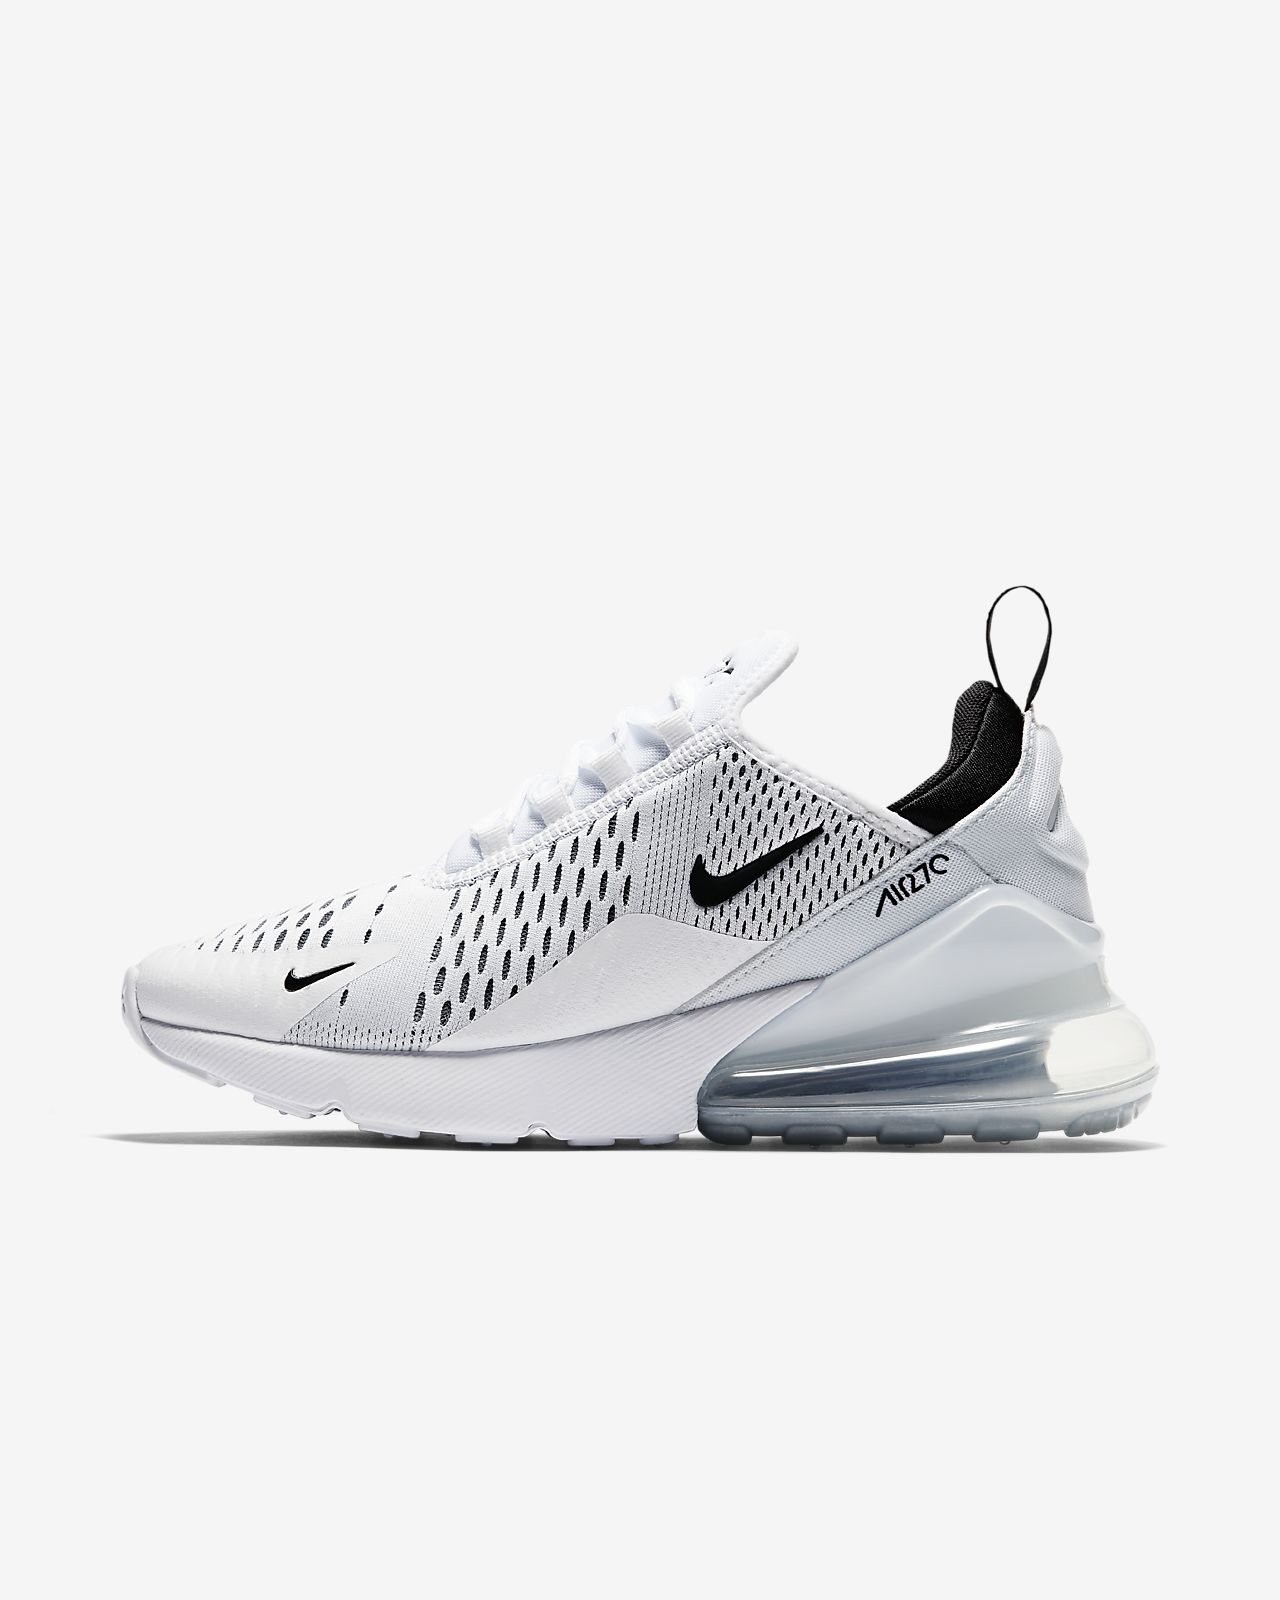 nike air max 270 femme blanche et rose - 60% remise - www ...